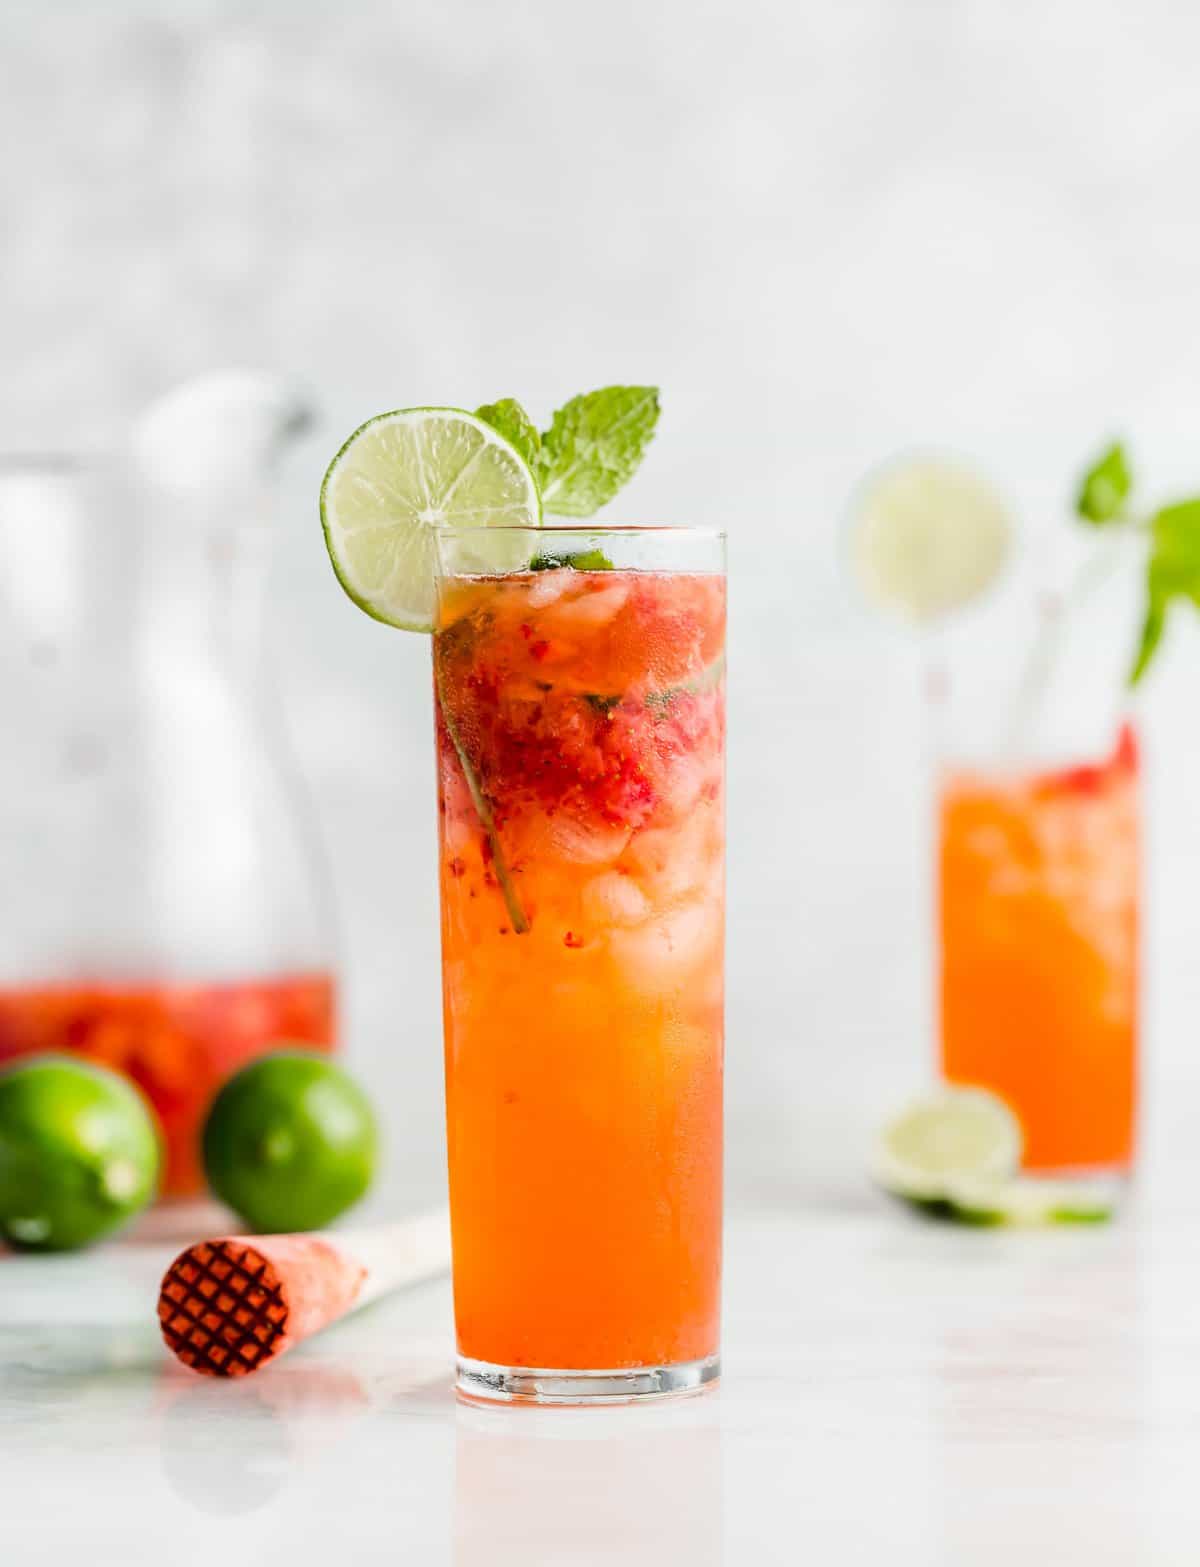 A tall mojito glass filled with a Strawberry Mocktail and ice with a lime wedge on the rim.